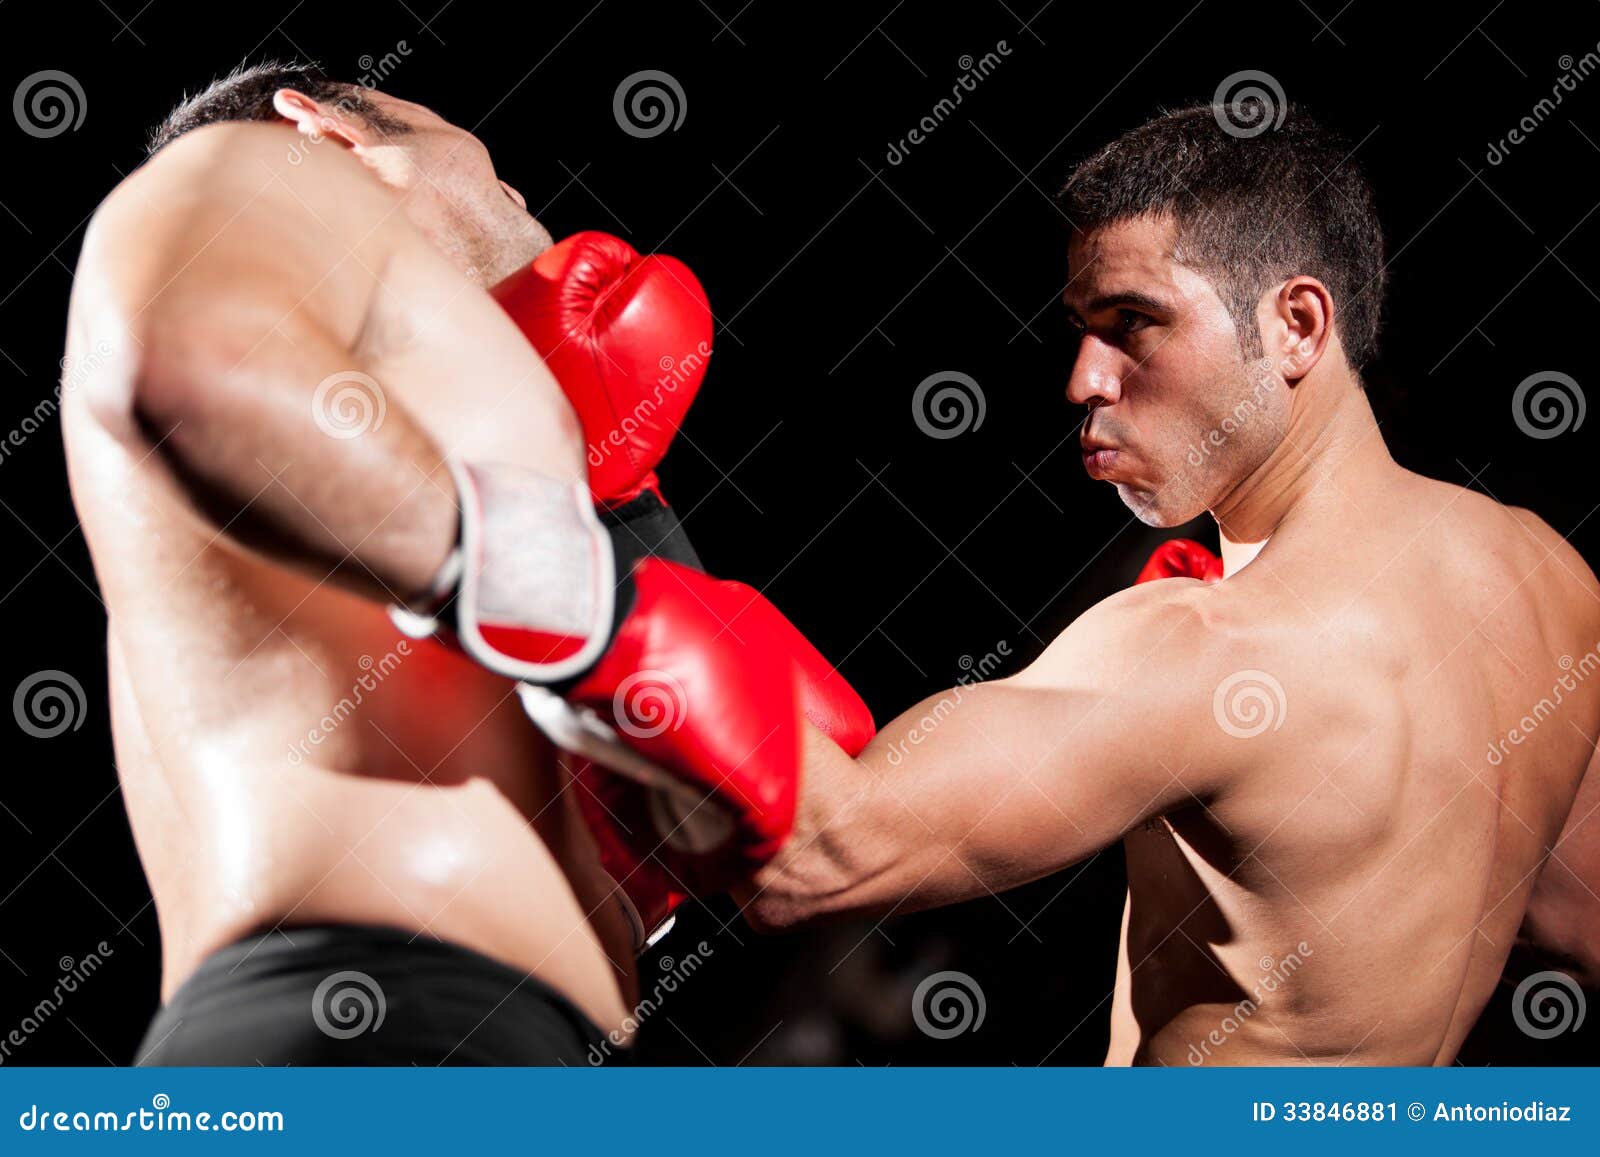 Boxing uppercut during a fight. Young Hispanic boxer throwing an uppercut and hitting his opponent during a box fight